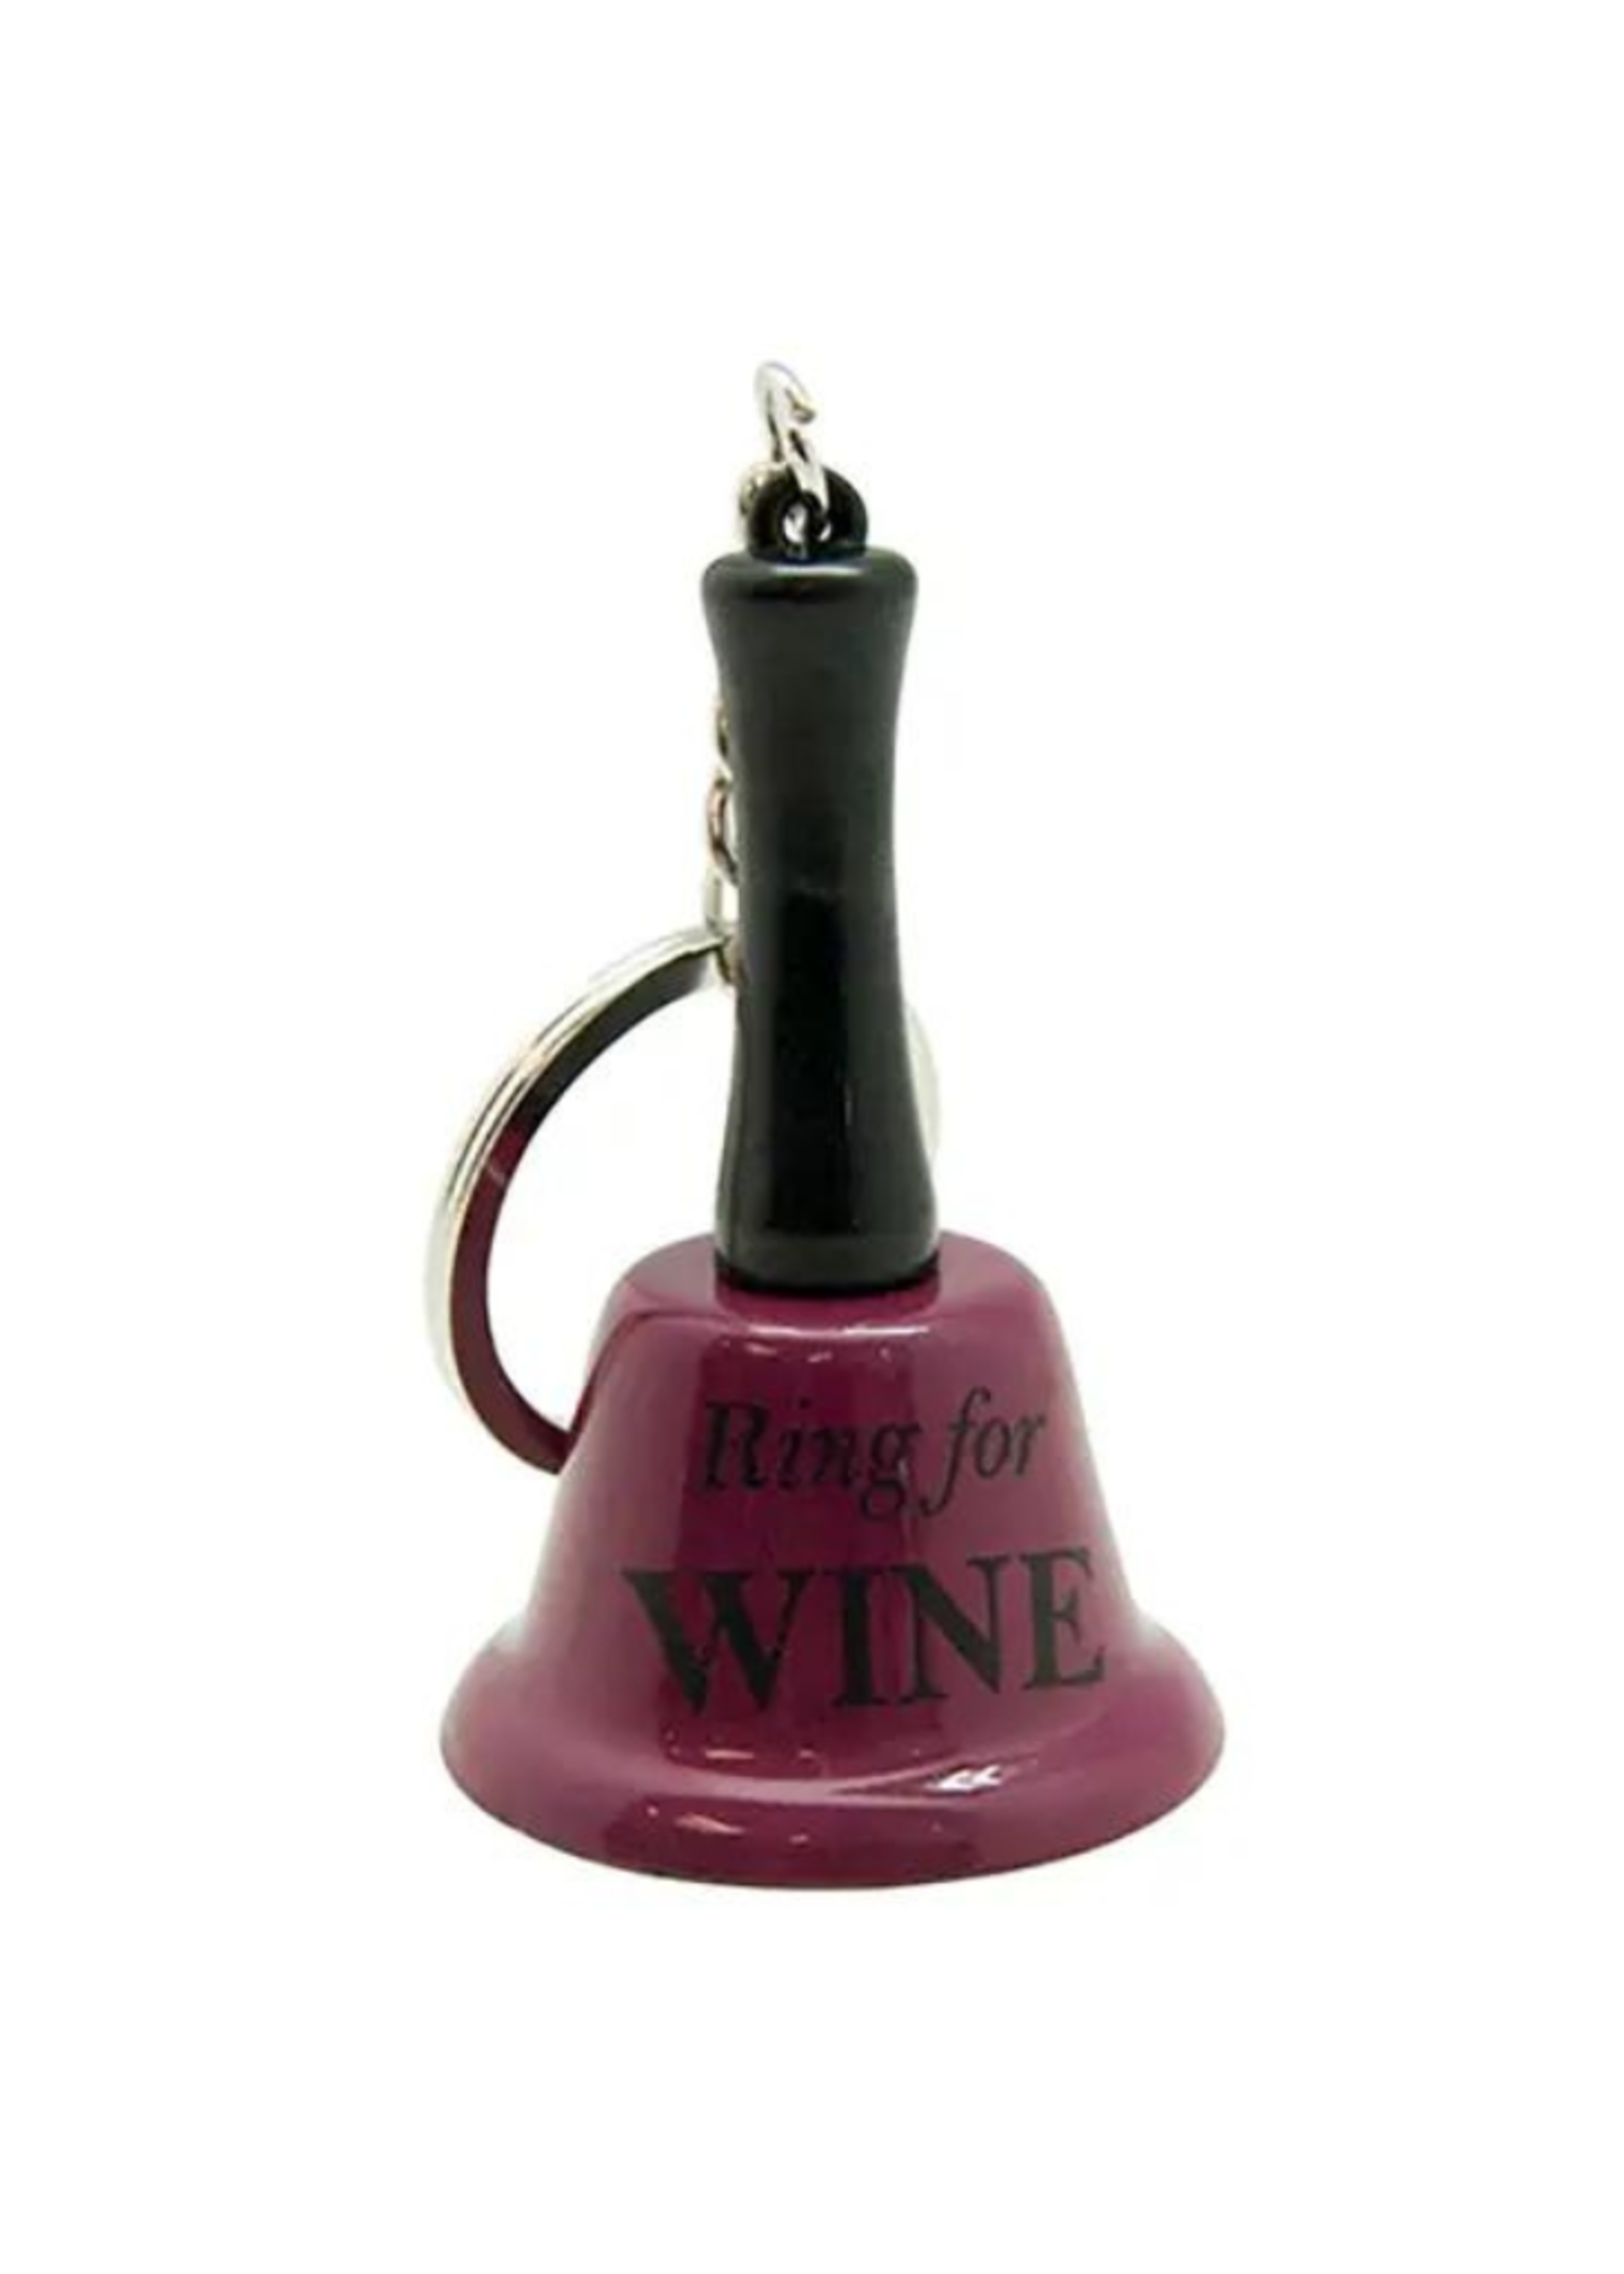 The Diabolical Gift People Keychain Bell - Ring For Wine